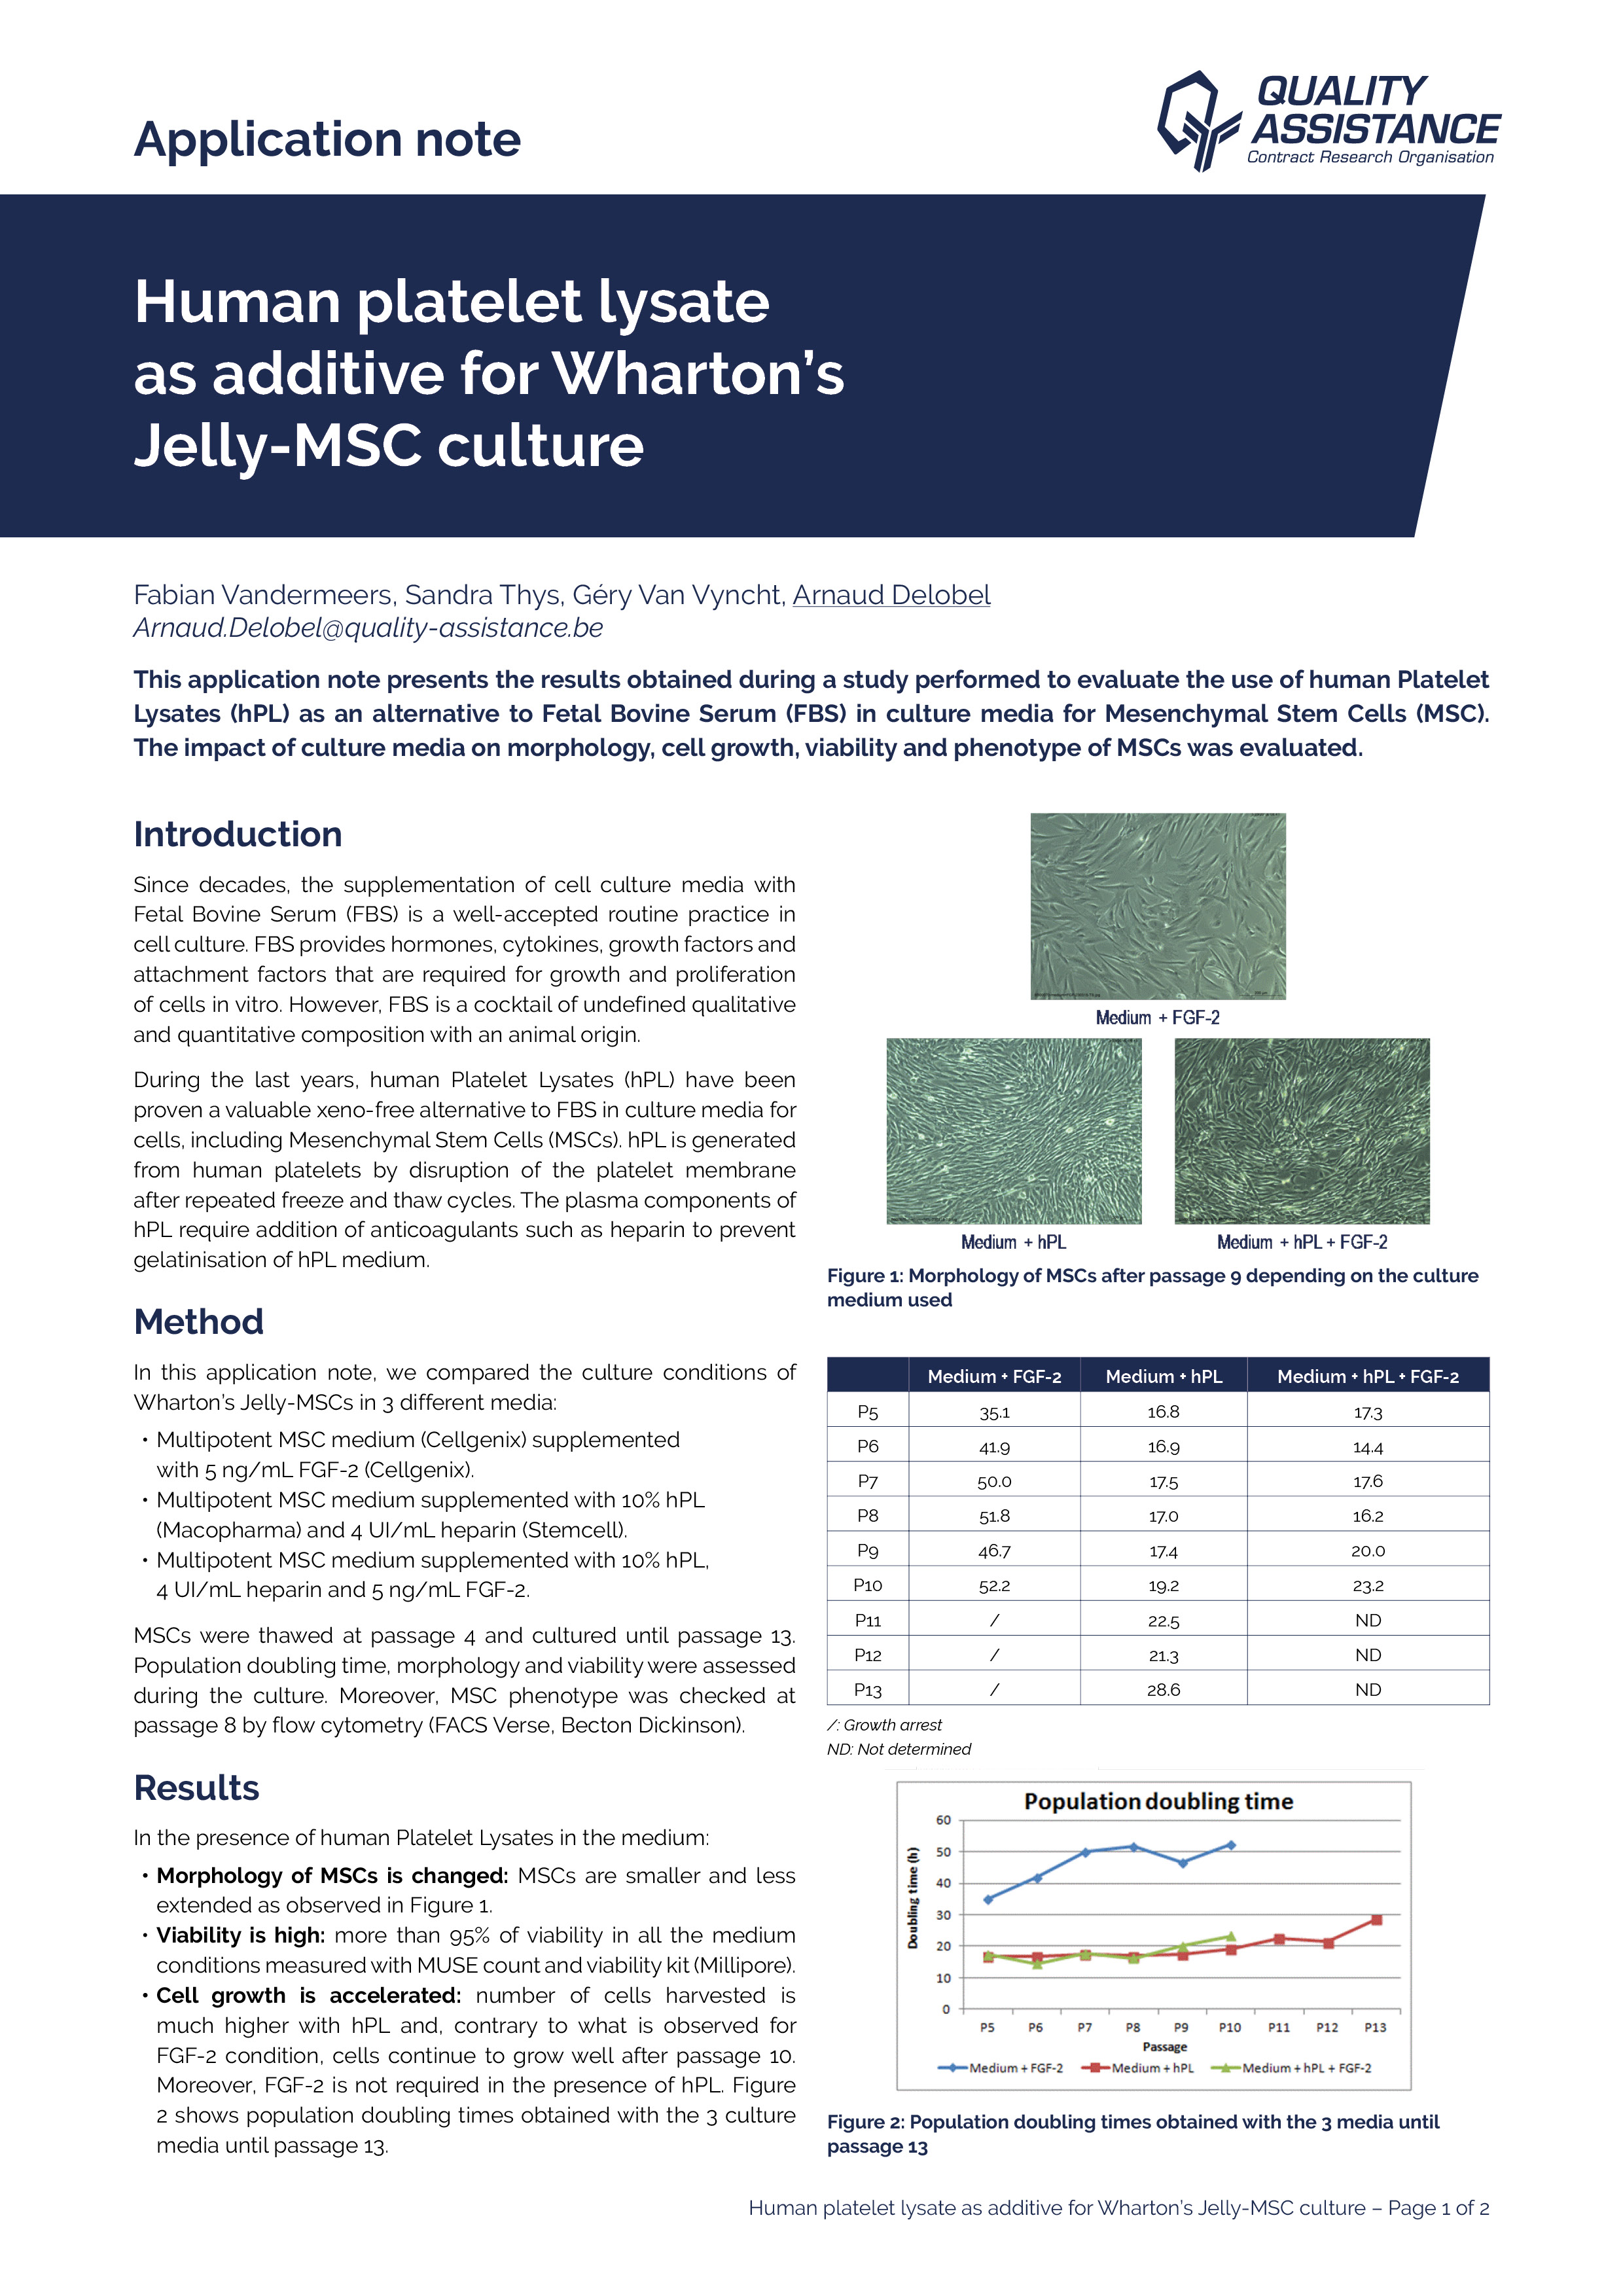 Human Platelet lysate as additive for Wharton Jelly MSC culture